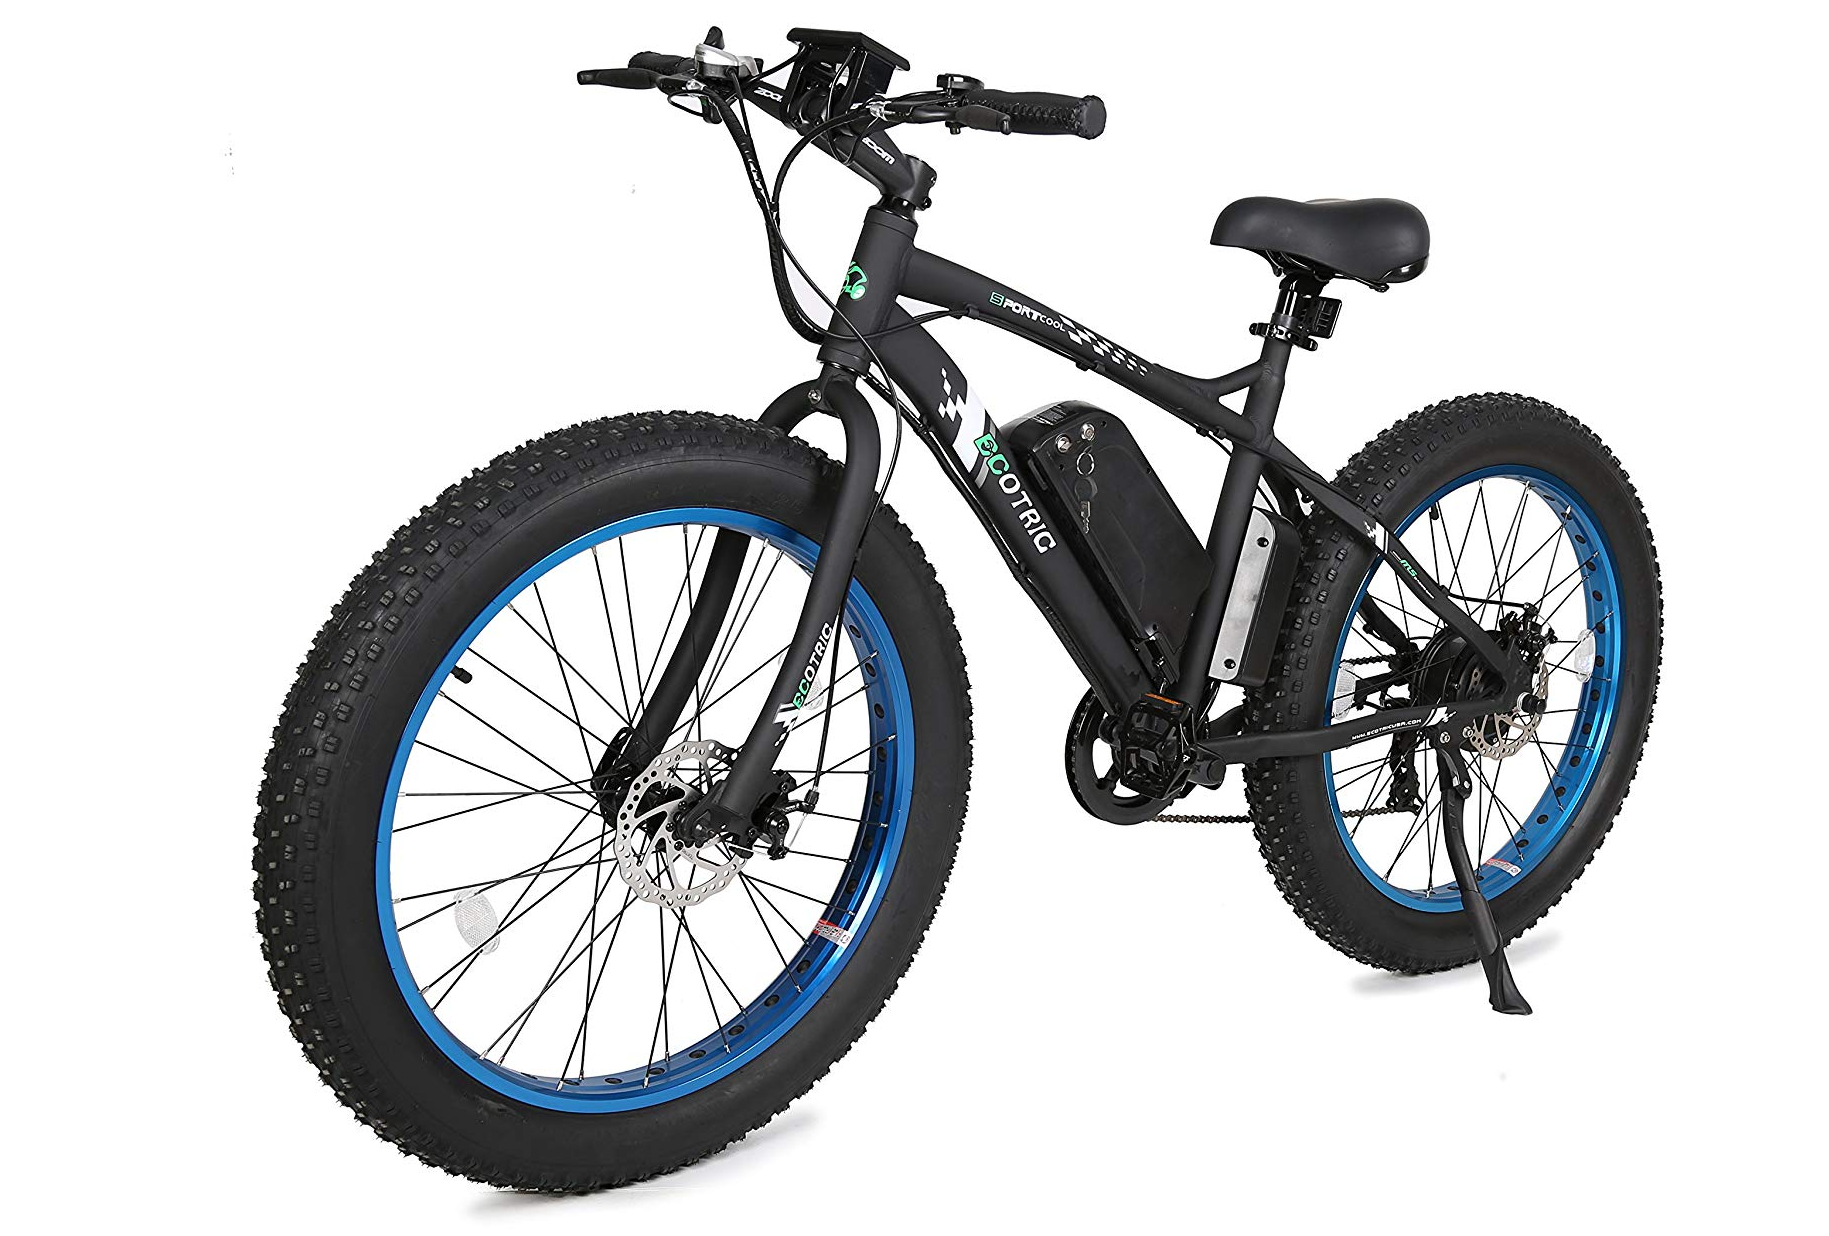 rei amazon and walmart drop prices for <entity>electric bikes</entity> labor day ecotric fat tire bike 17  1